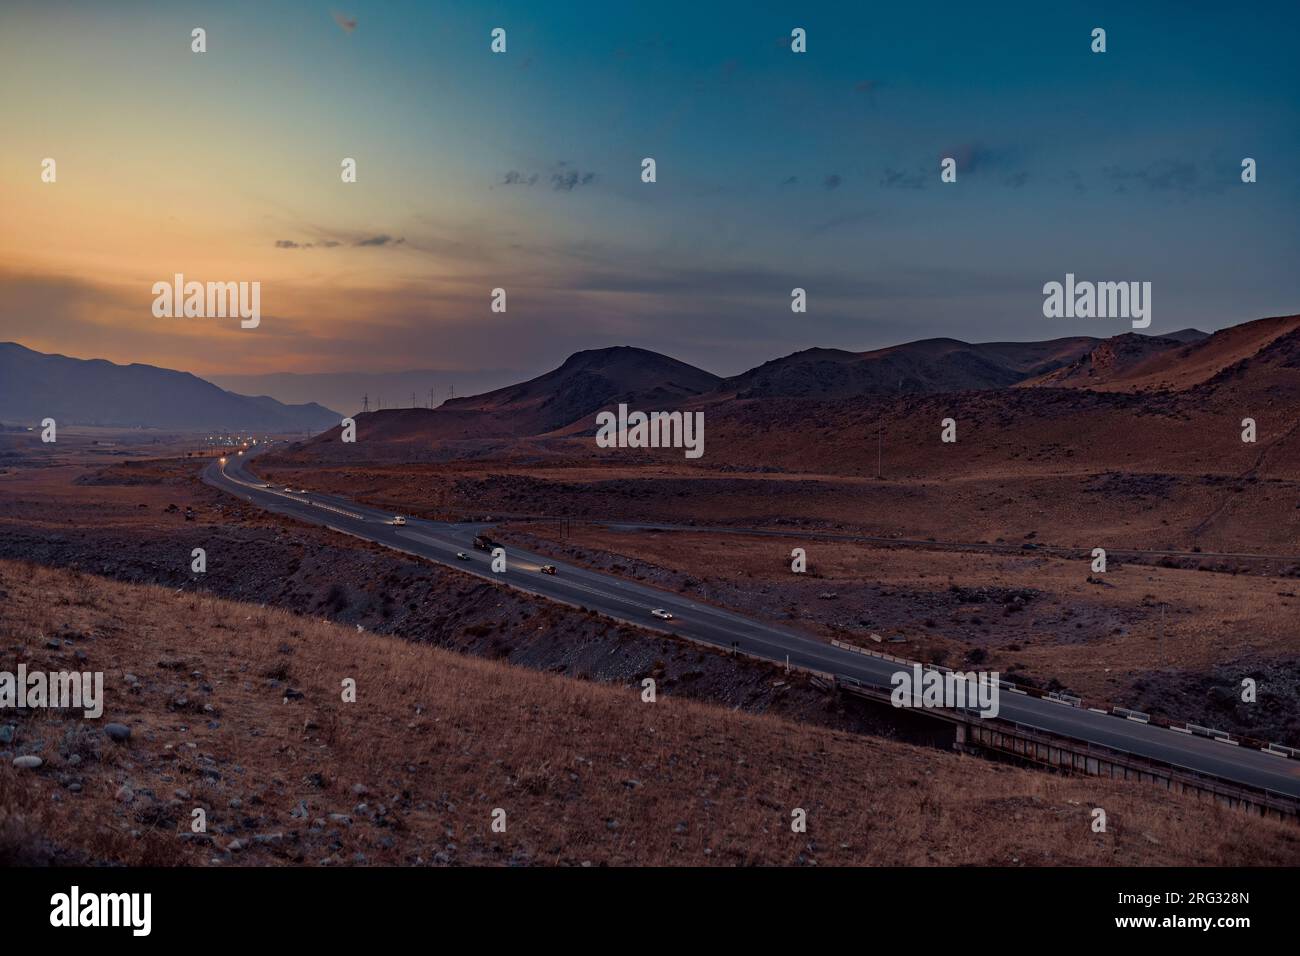 Cars on mountains road at sunset, Kyrgyzstan Stock Photo